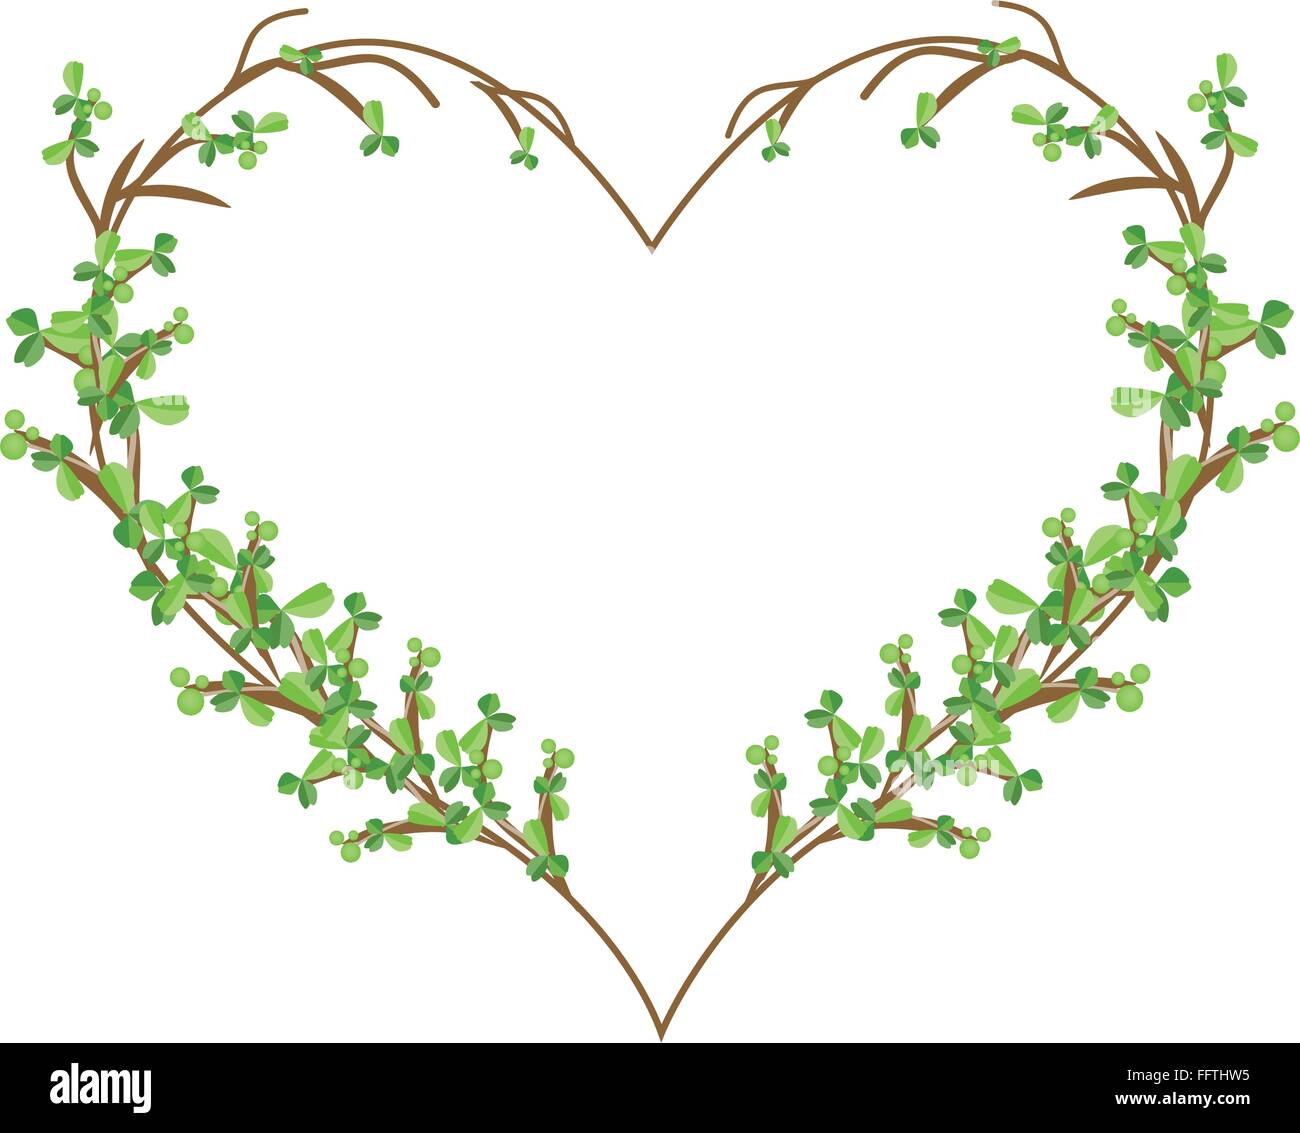 Love Concept, Illustration of Carmona Retusa (Vahl) or Masam Branches Forming in Heart Shape Isolated on White Background. Stock Vector